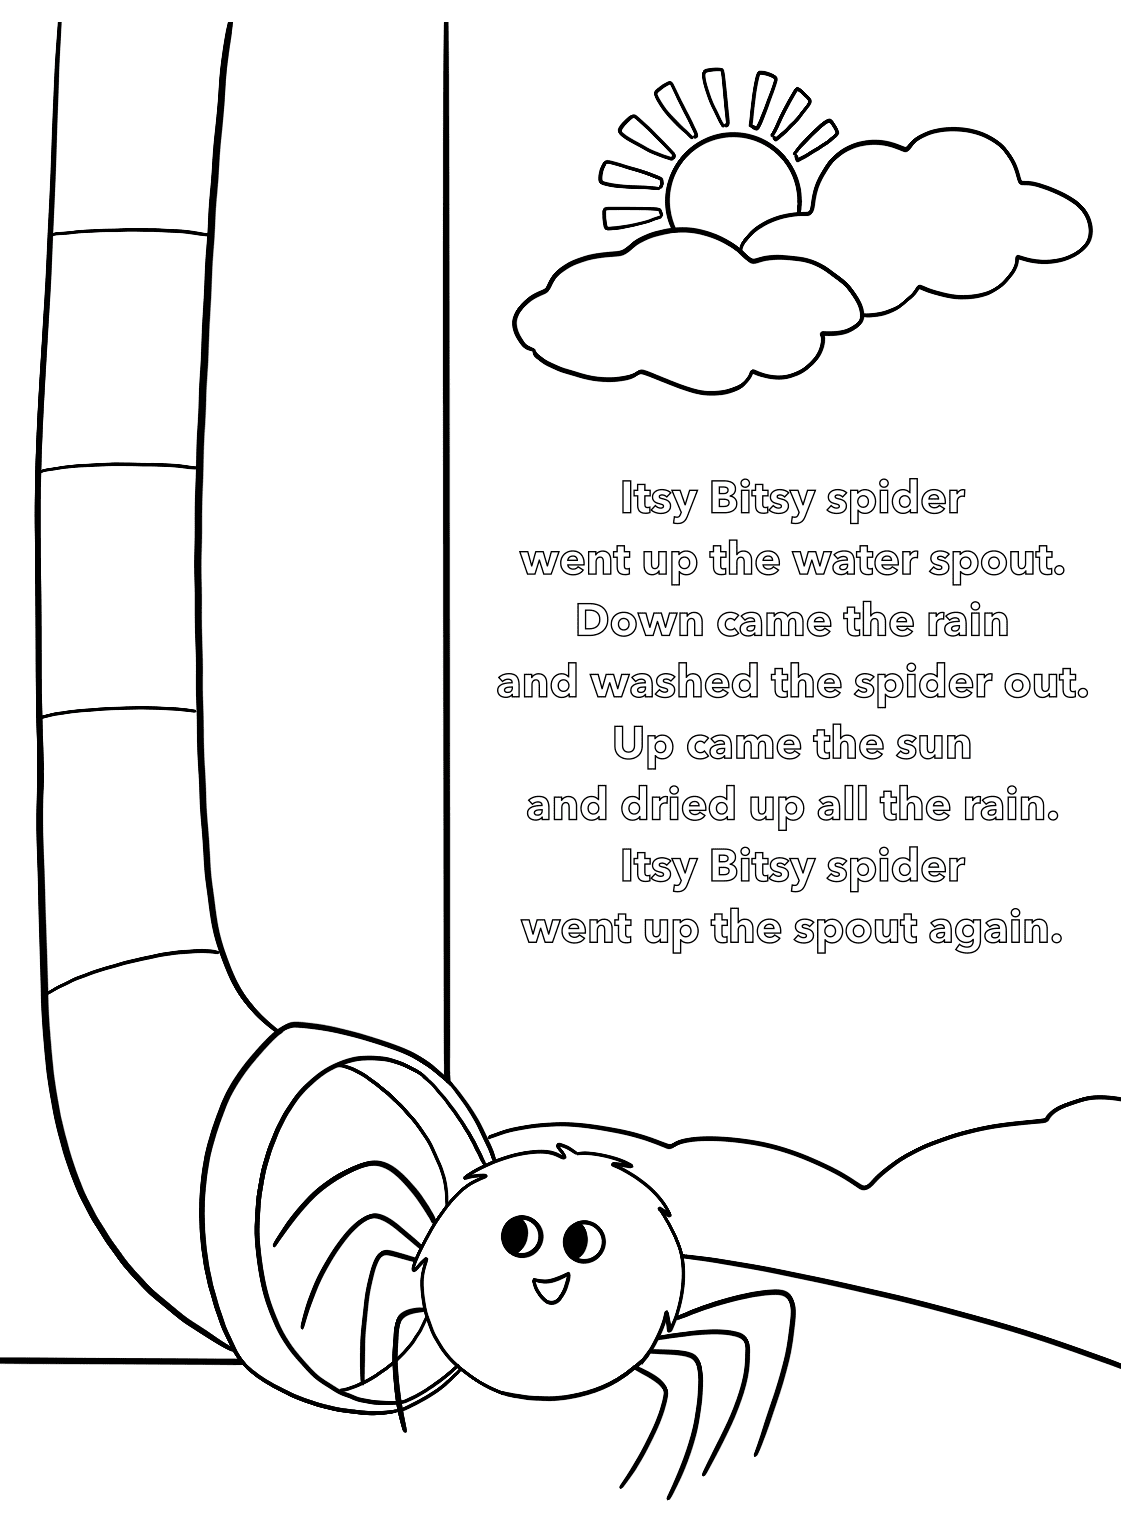 Itsy Bitsy Spider Coloring Page - Home Design Ideas